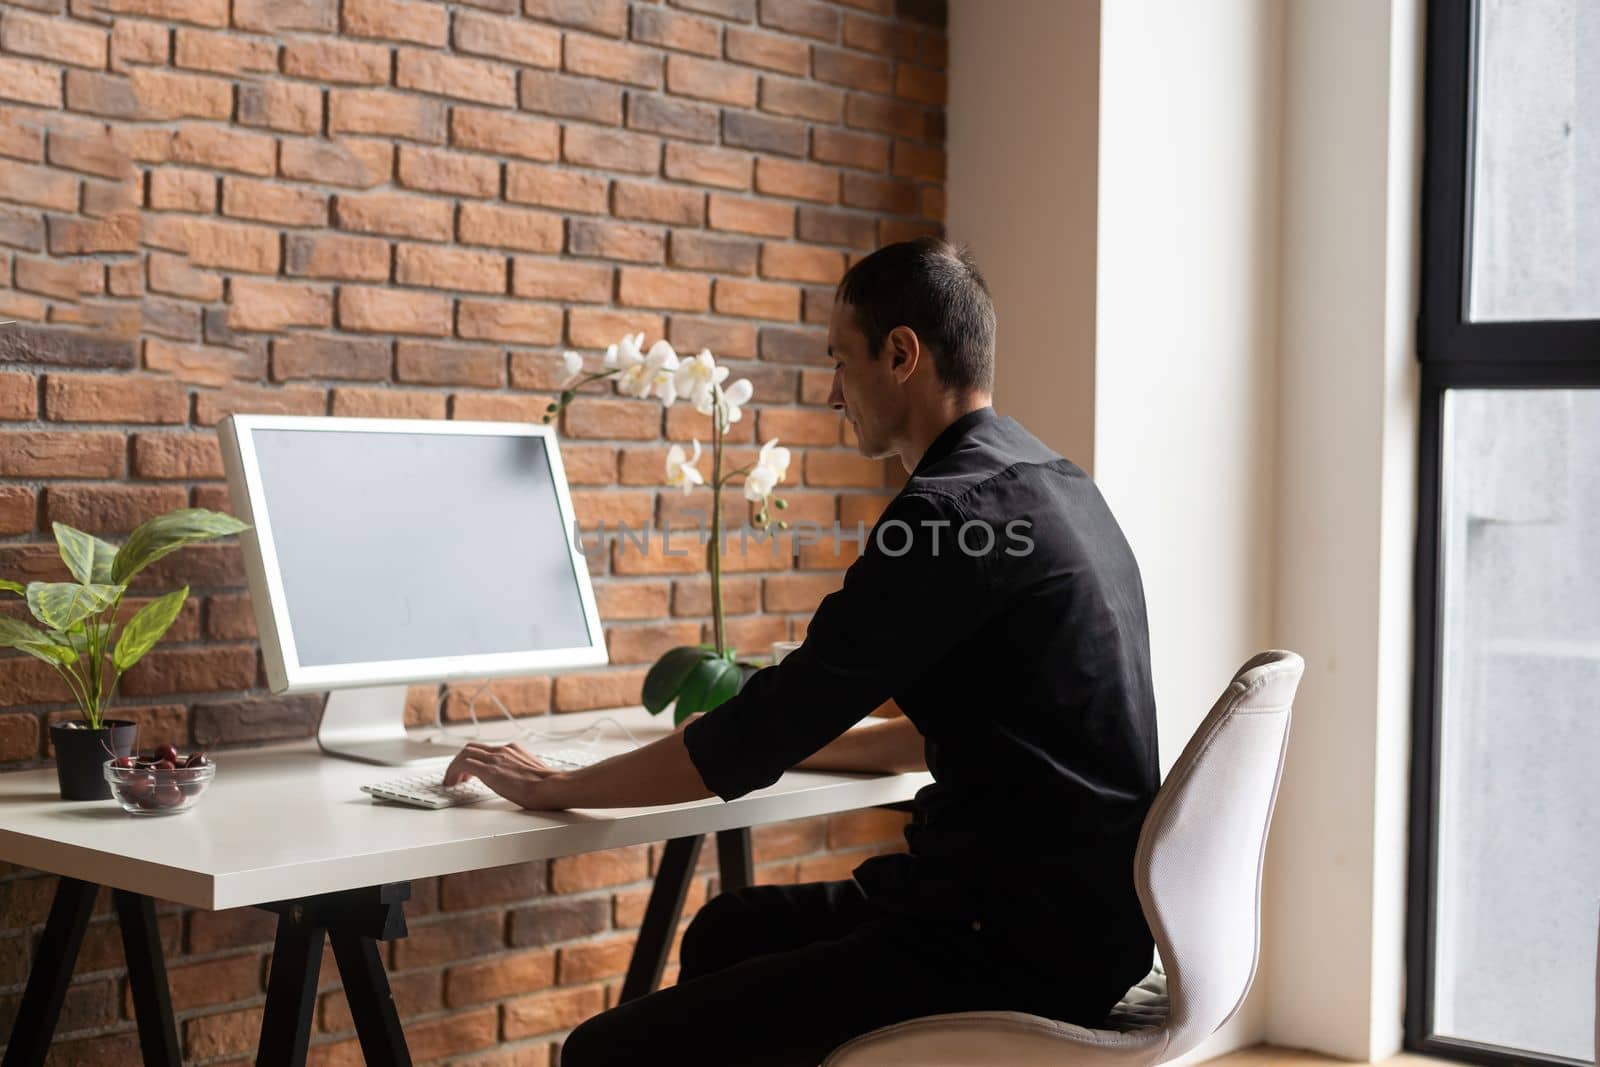 Focused young man using laptop, typing on keyboard, writing email or message, chatting, shopping, successful freelancer working online on computer